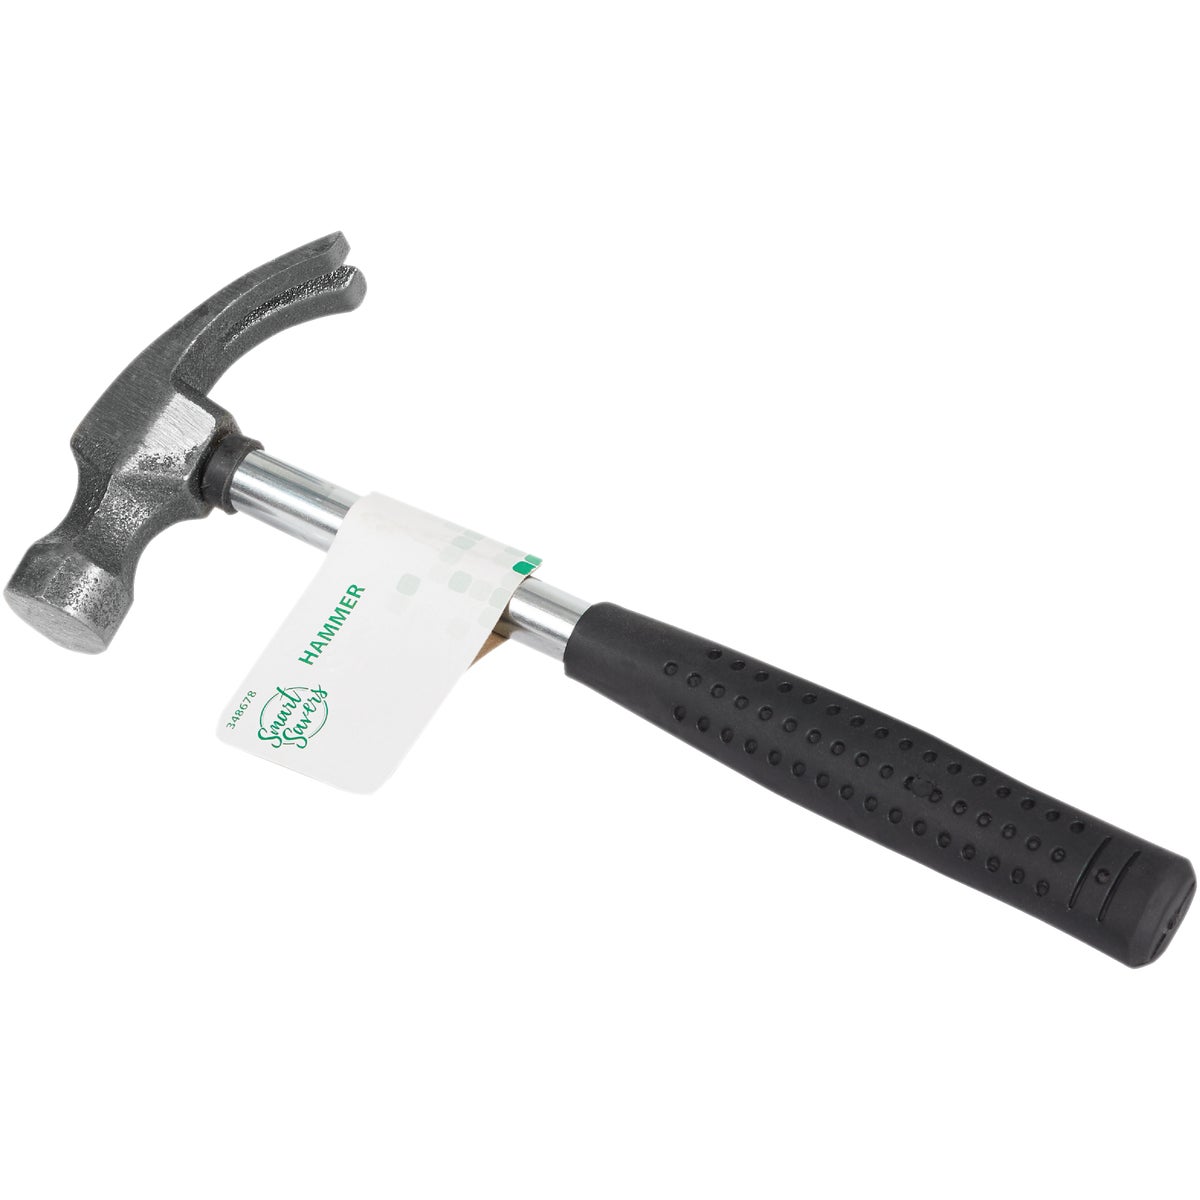 Item 348678, Smart Savers hammer. 8-ounce head weight, 10-inch total length.